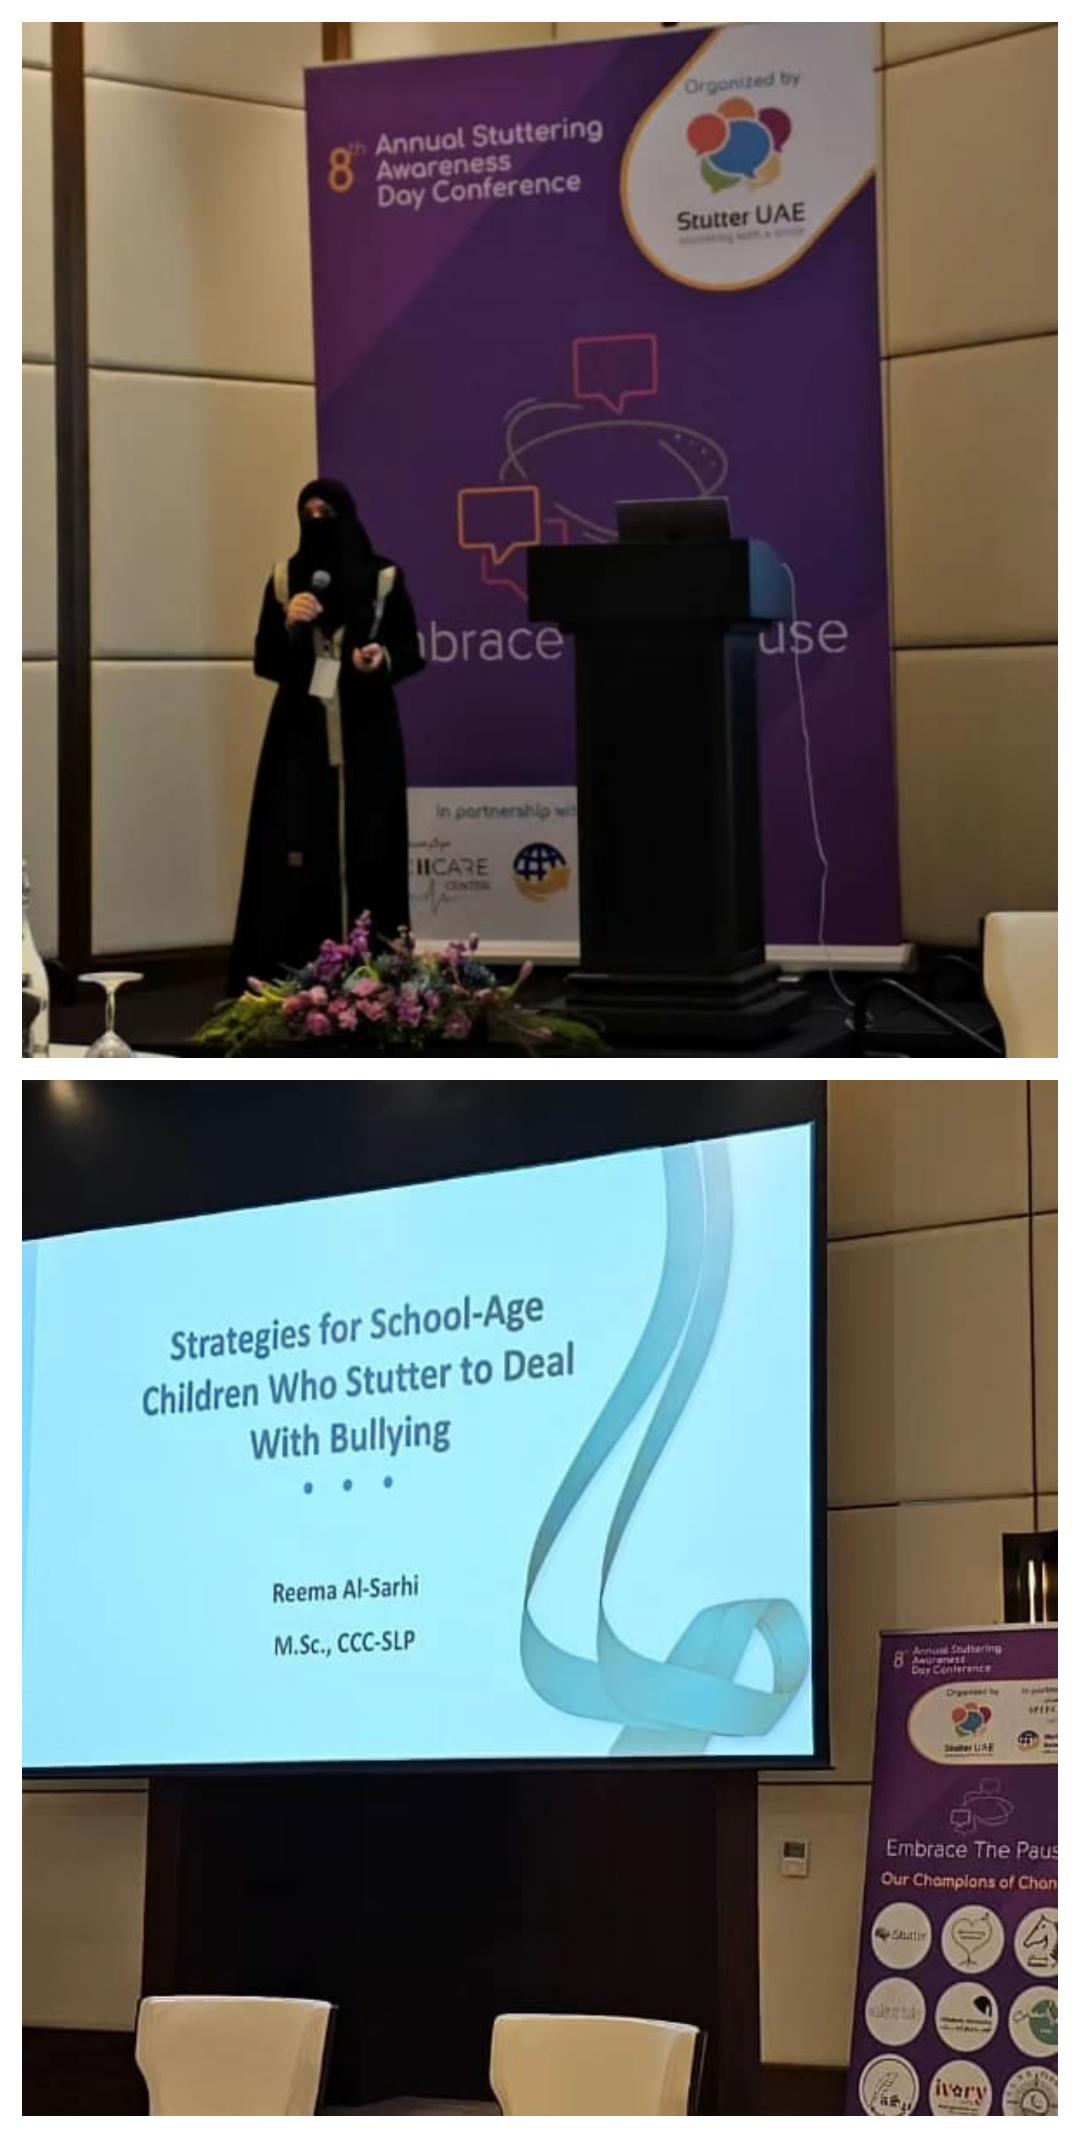 8th Annual Stuttering Awareness Day Conference, UAE, 21 October 2023